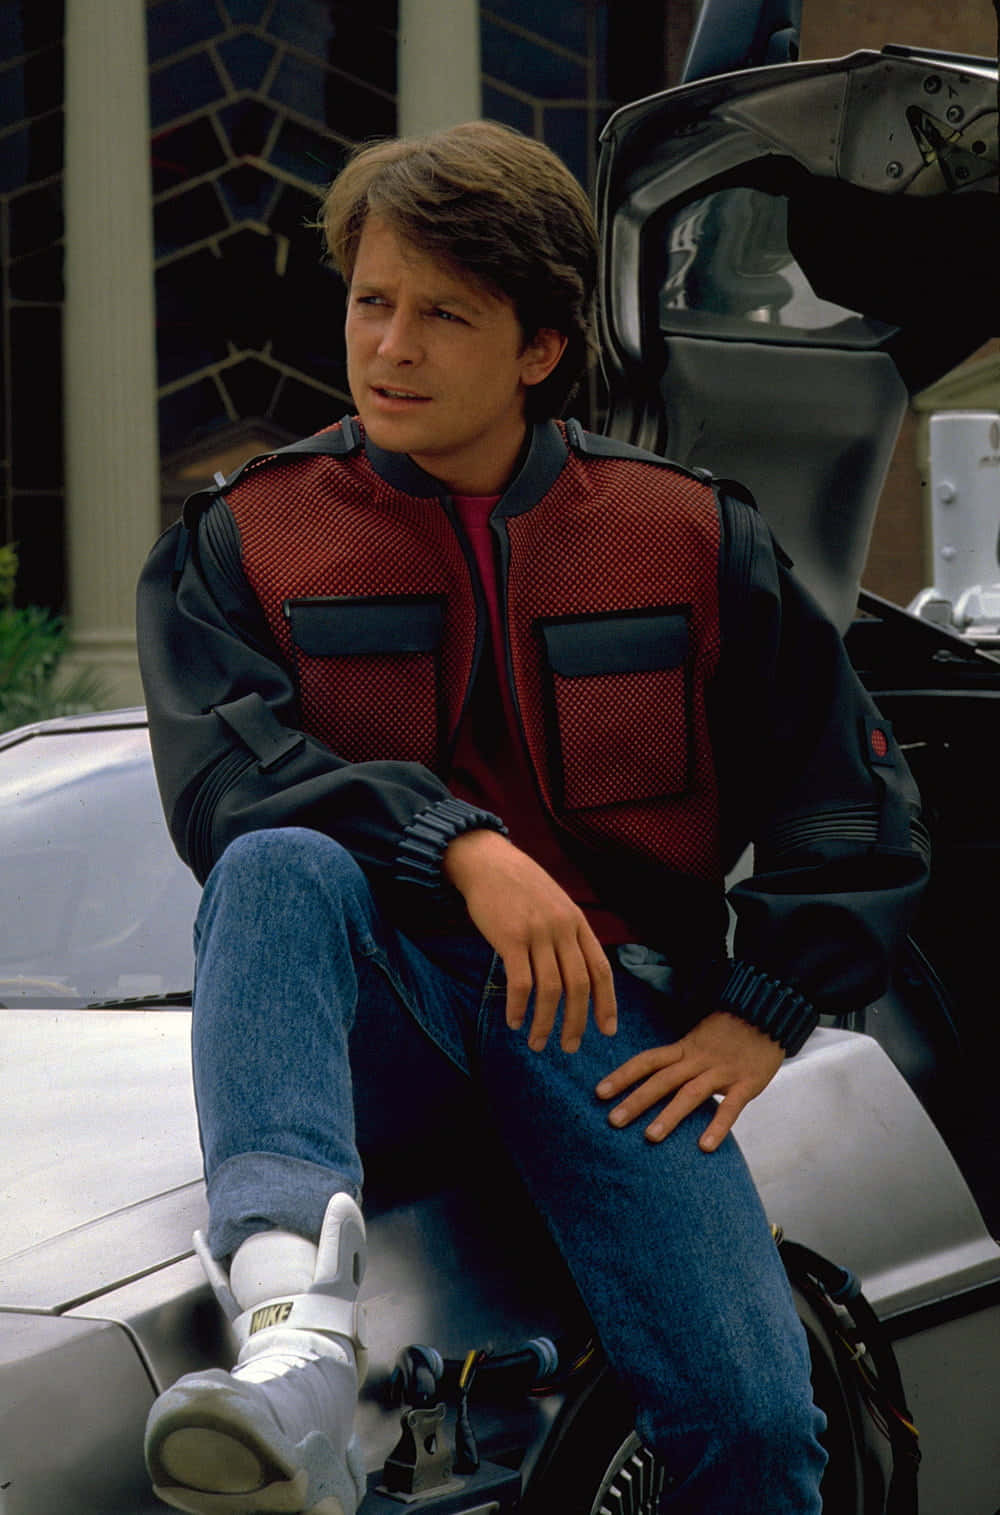 Michael J. Fox - Actor, Author, And Parkinson's Disease Advocate For Over 25 Years' Background